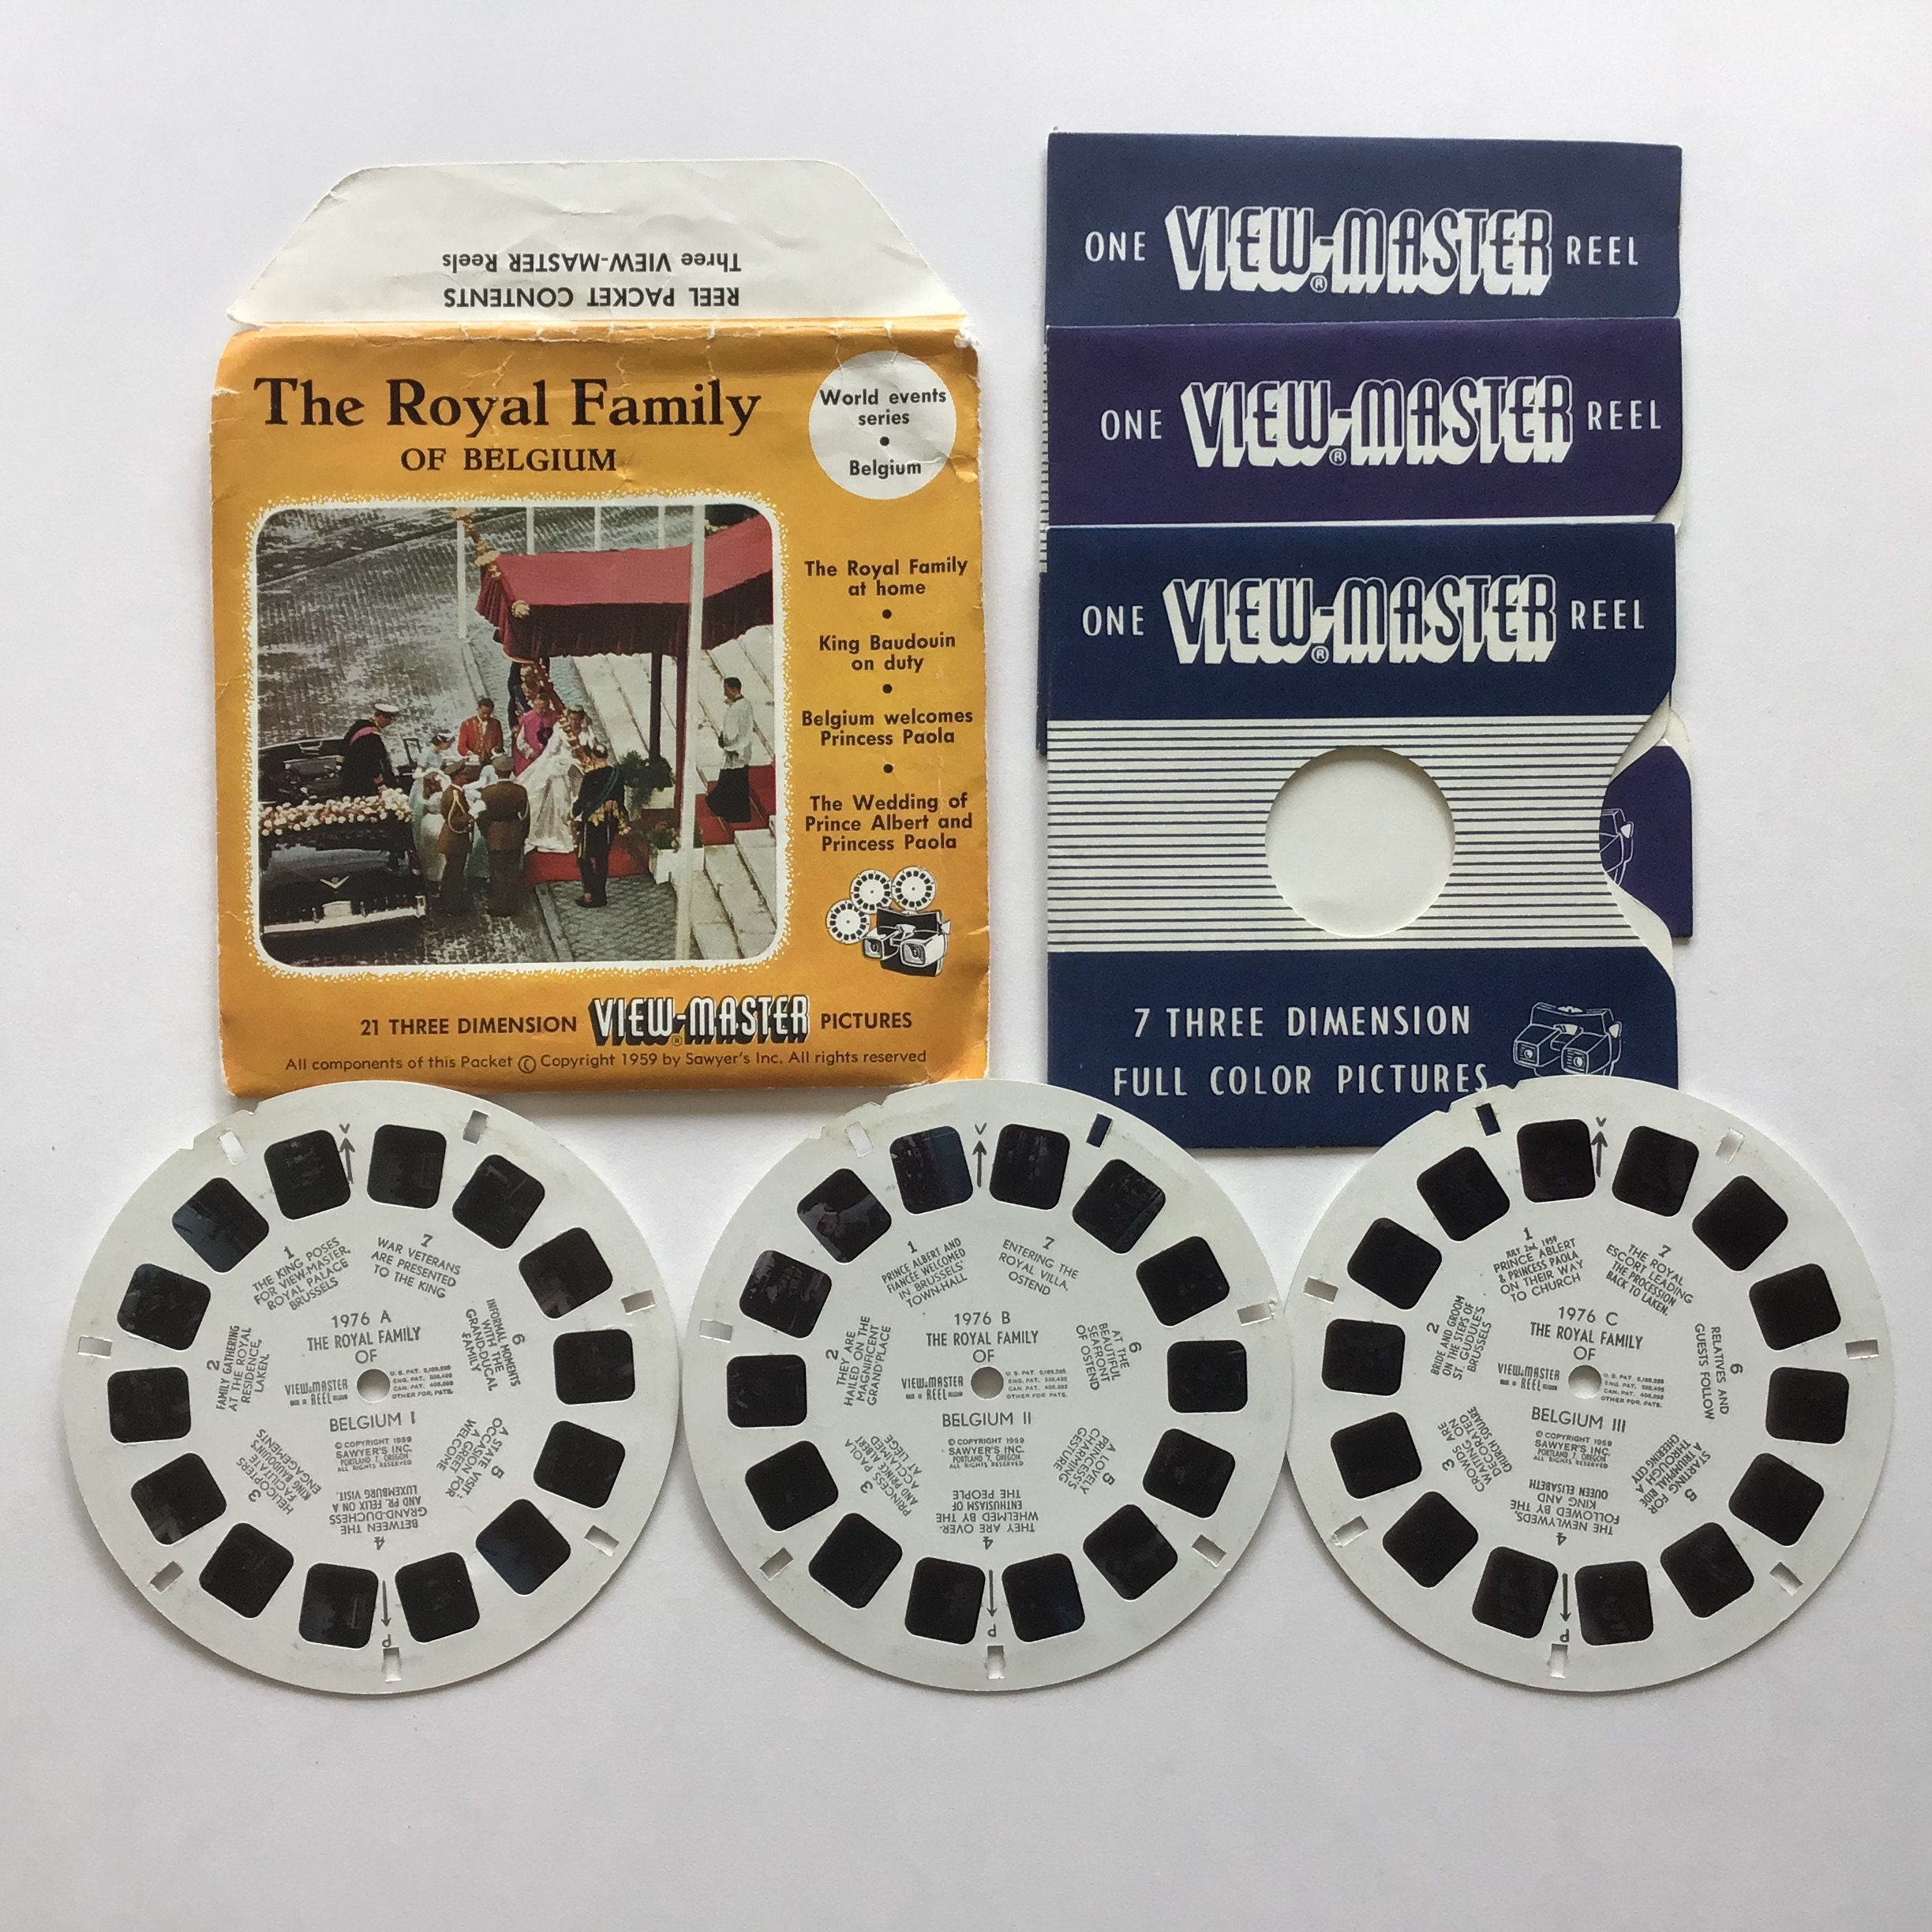 View-master Reels Royalfamily of Belgium World Events Series Set of 3 Viewmaster  Reels Sawyers 